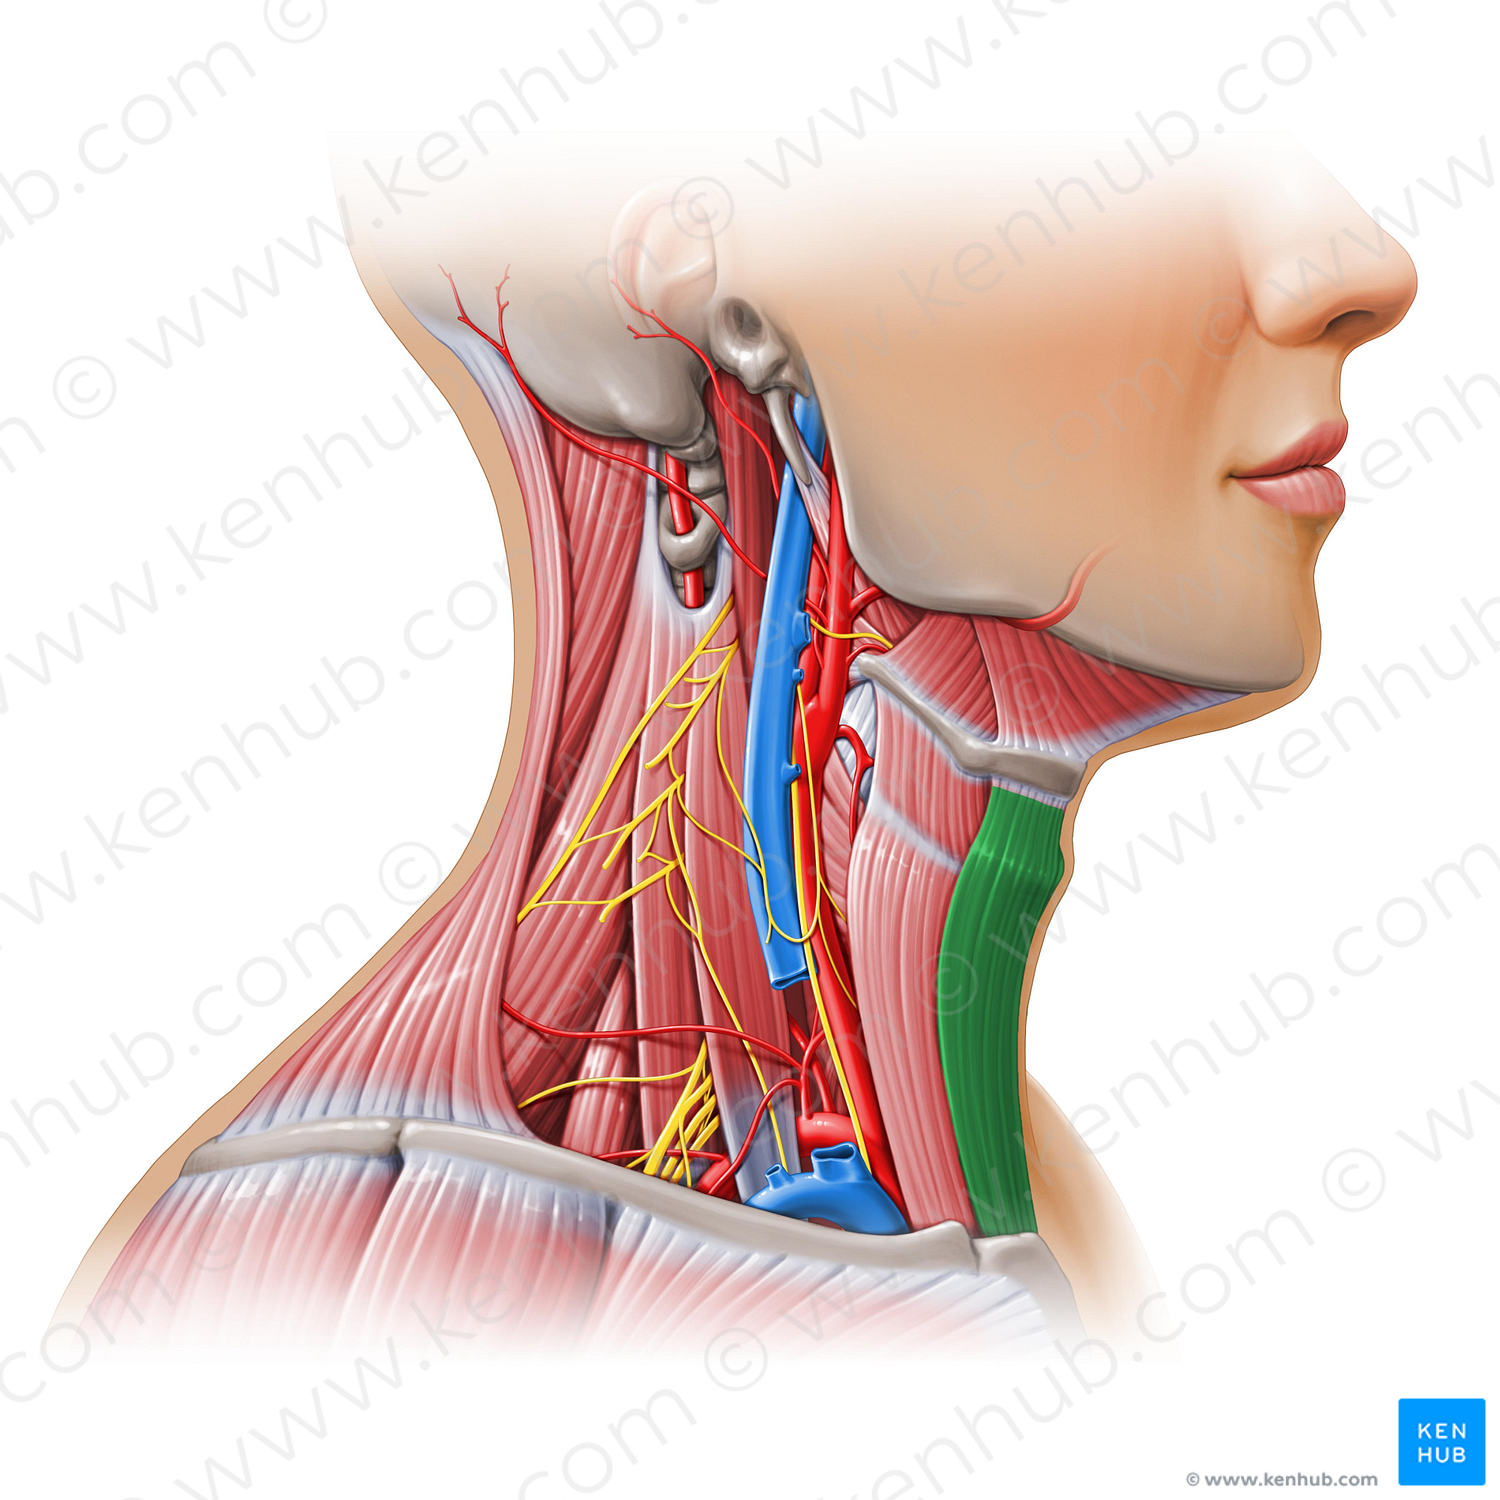 Sternohyoid muscle (#11151)